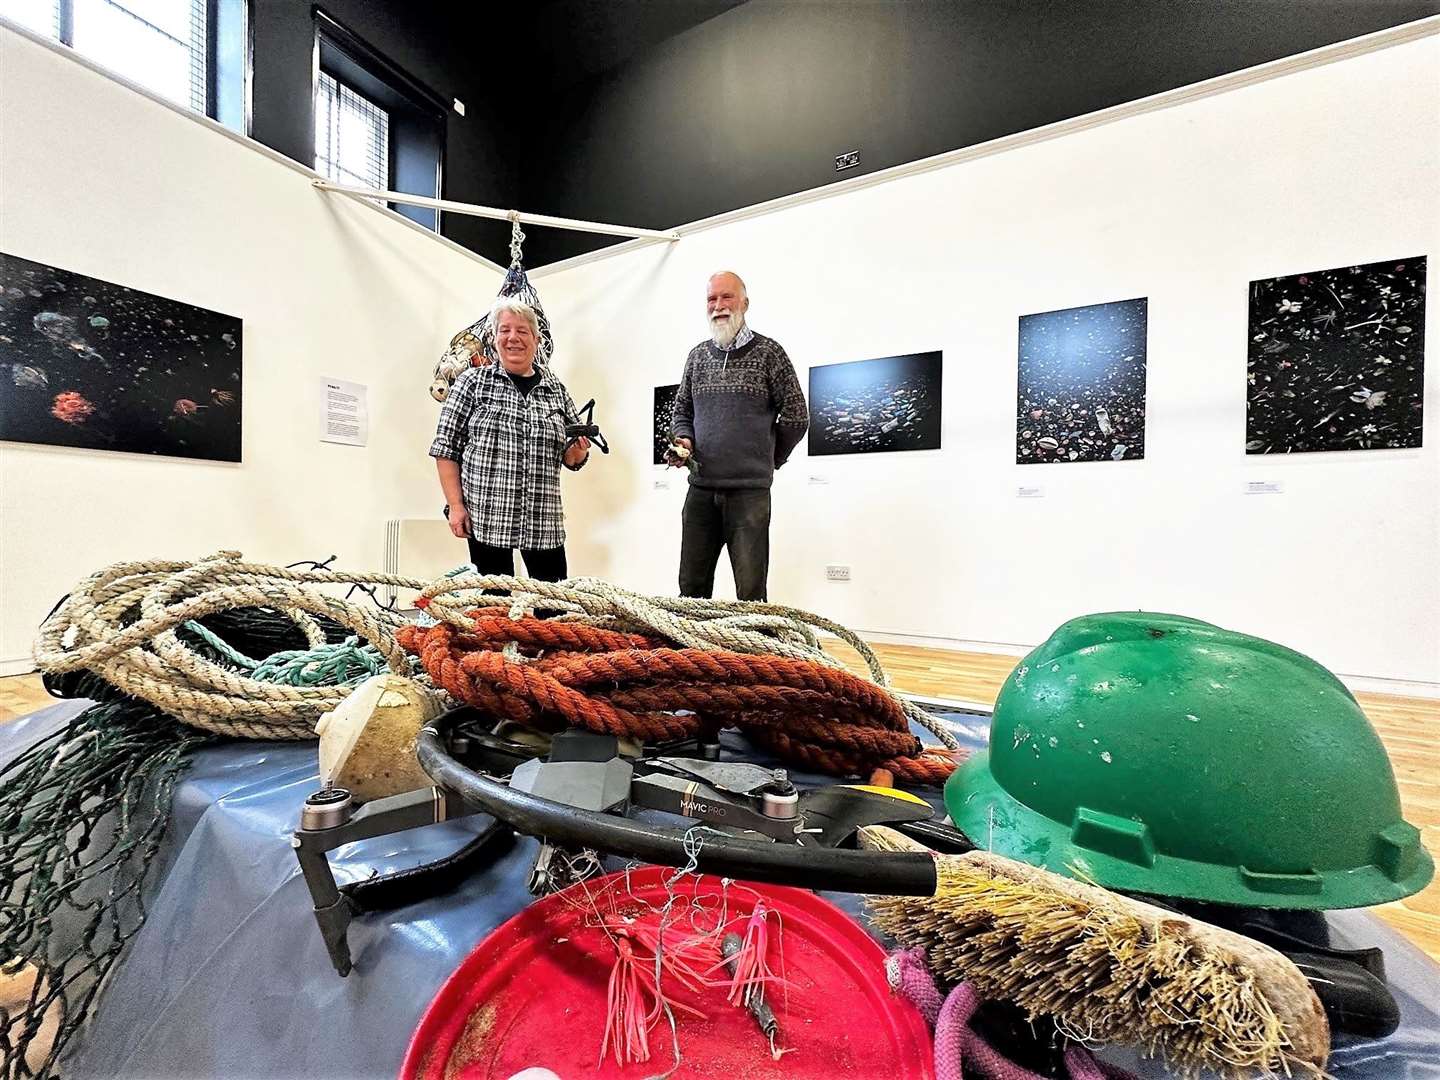 Dorcas Sinclair (left) and her husband Allan (right) at Thurso Library and Art Gallery today checking out the award-winning photographer Mandy Barker's Our Plastic Ocean exhibition.